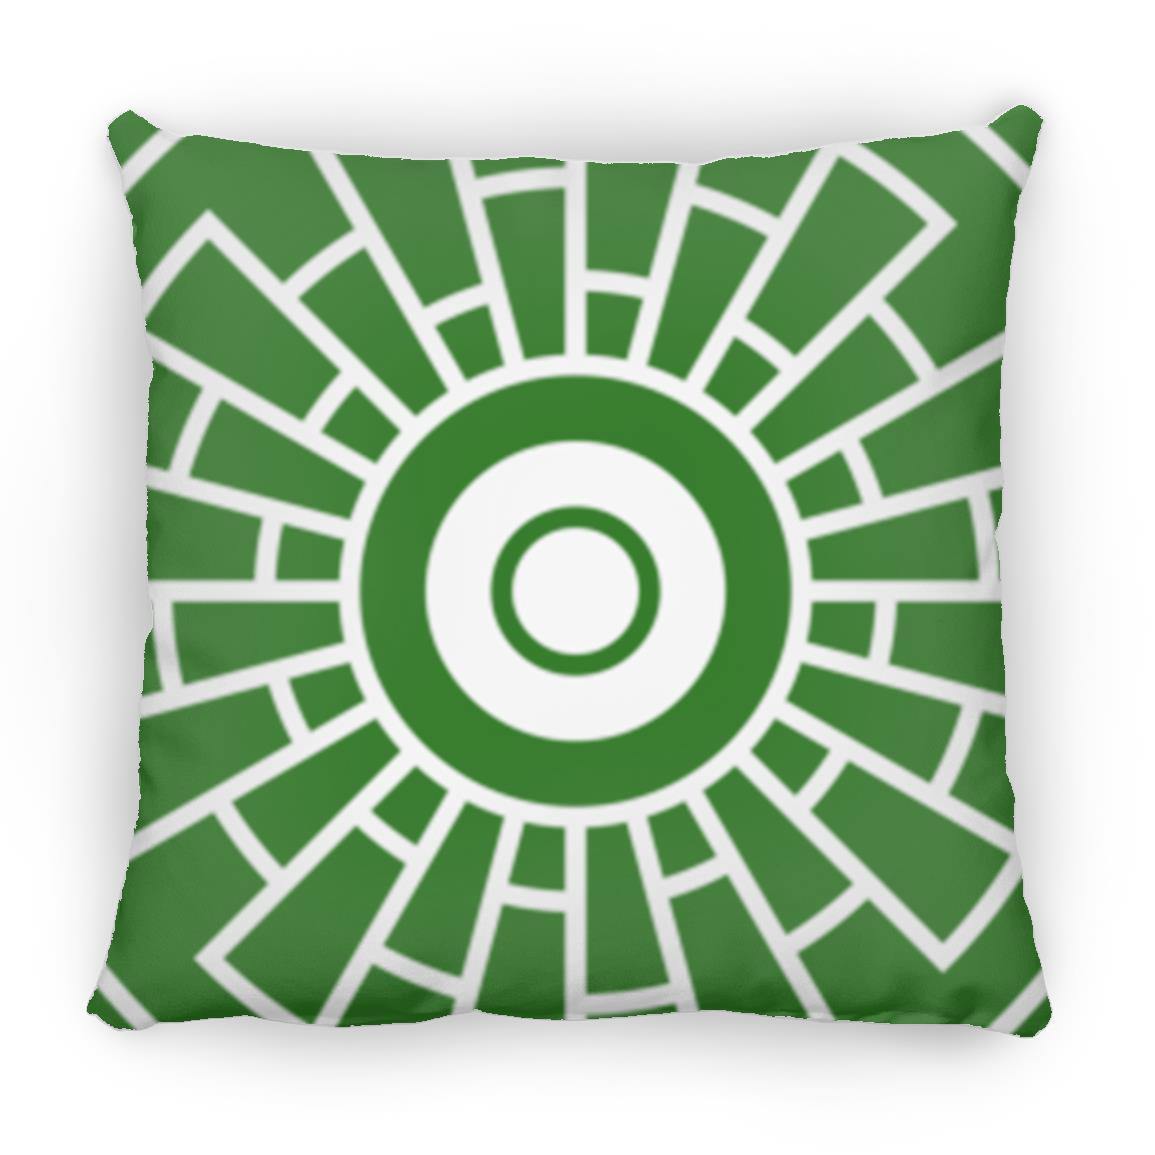 Crop Circle Pillow - Sixpenny Handley - Shapes of Wisdom